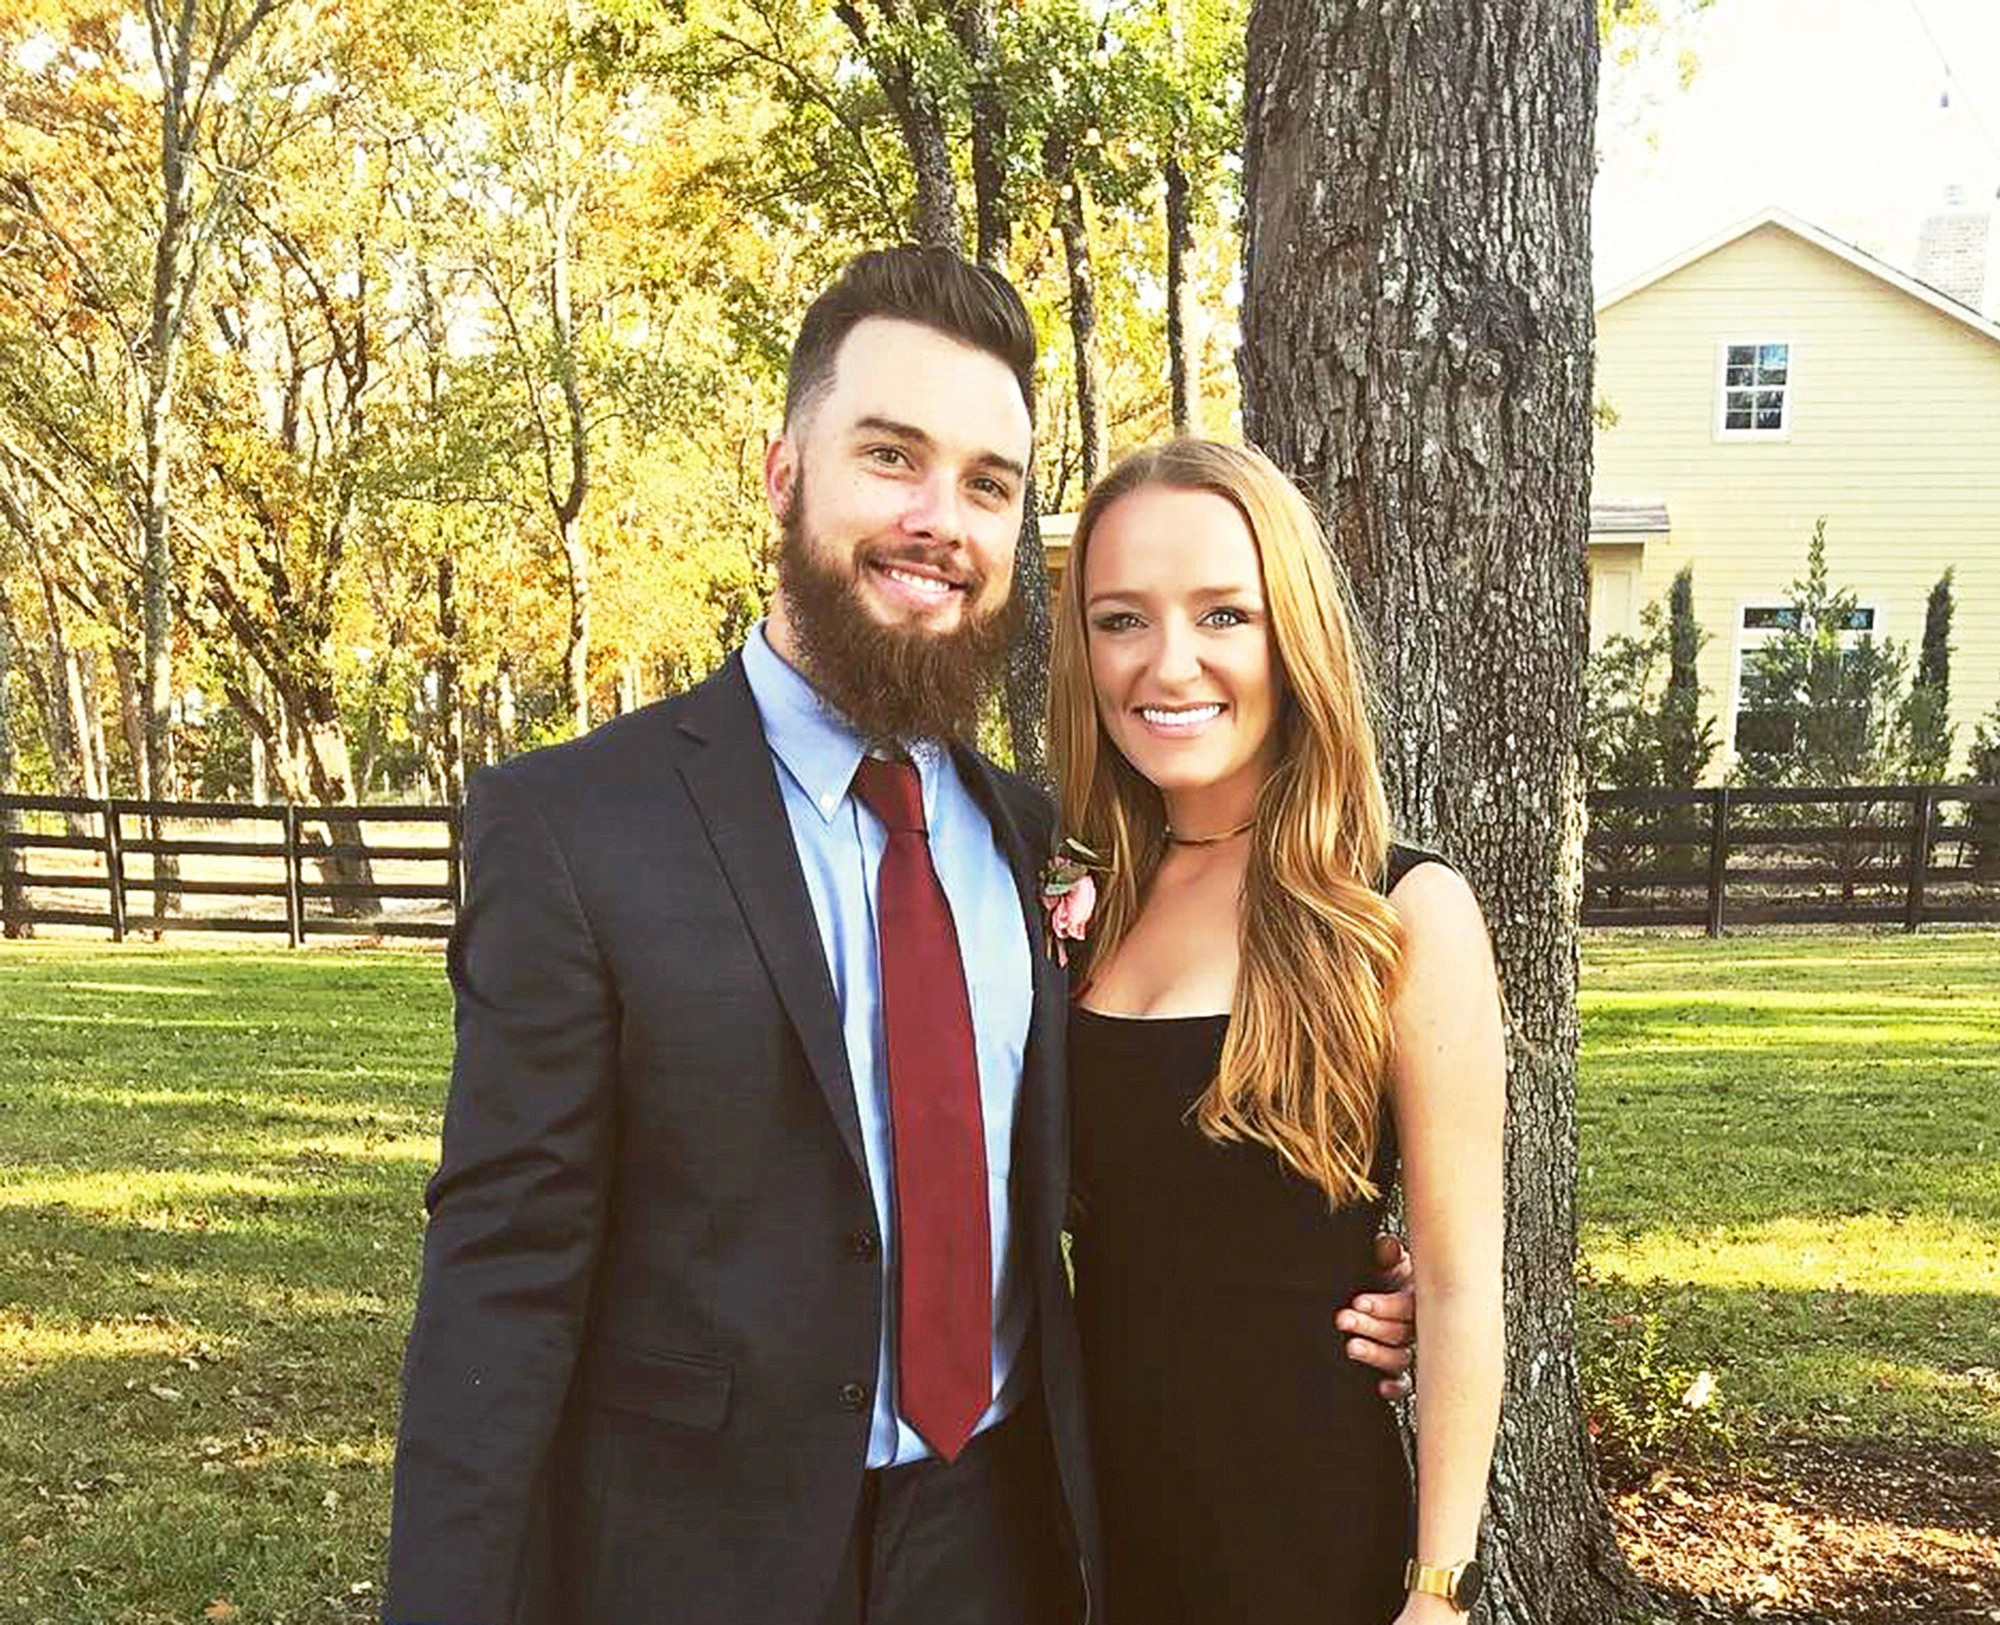 Teen Mom S Maci Bookout Ryan Edwards Ups And Downs Over The Years Us Weekly